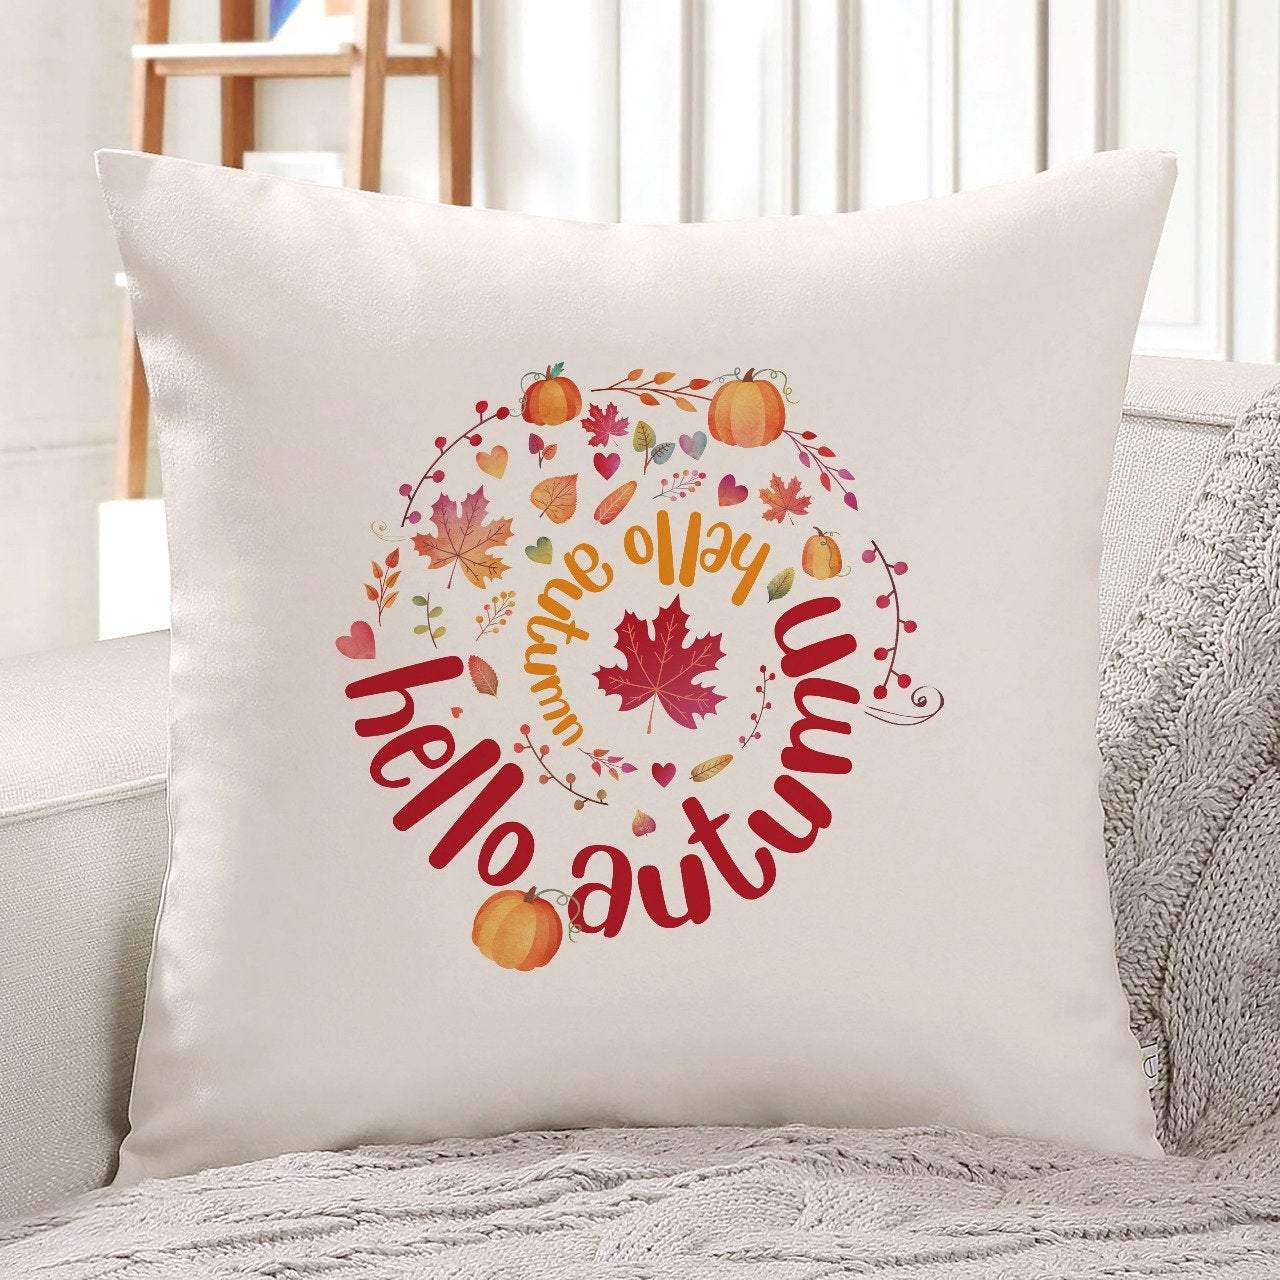 Hello Autumn cushion cover with autumn leaves and pumpkins